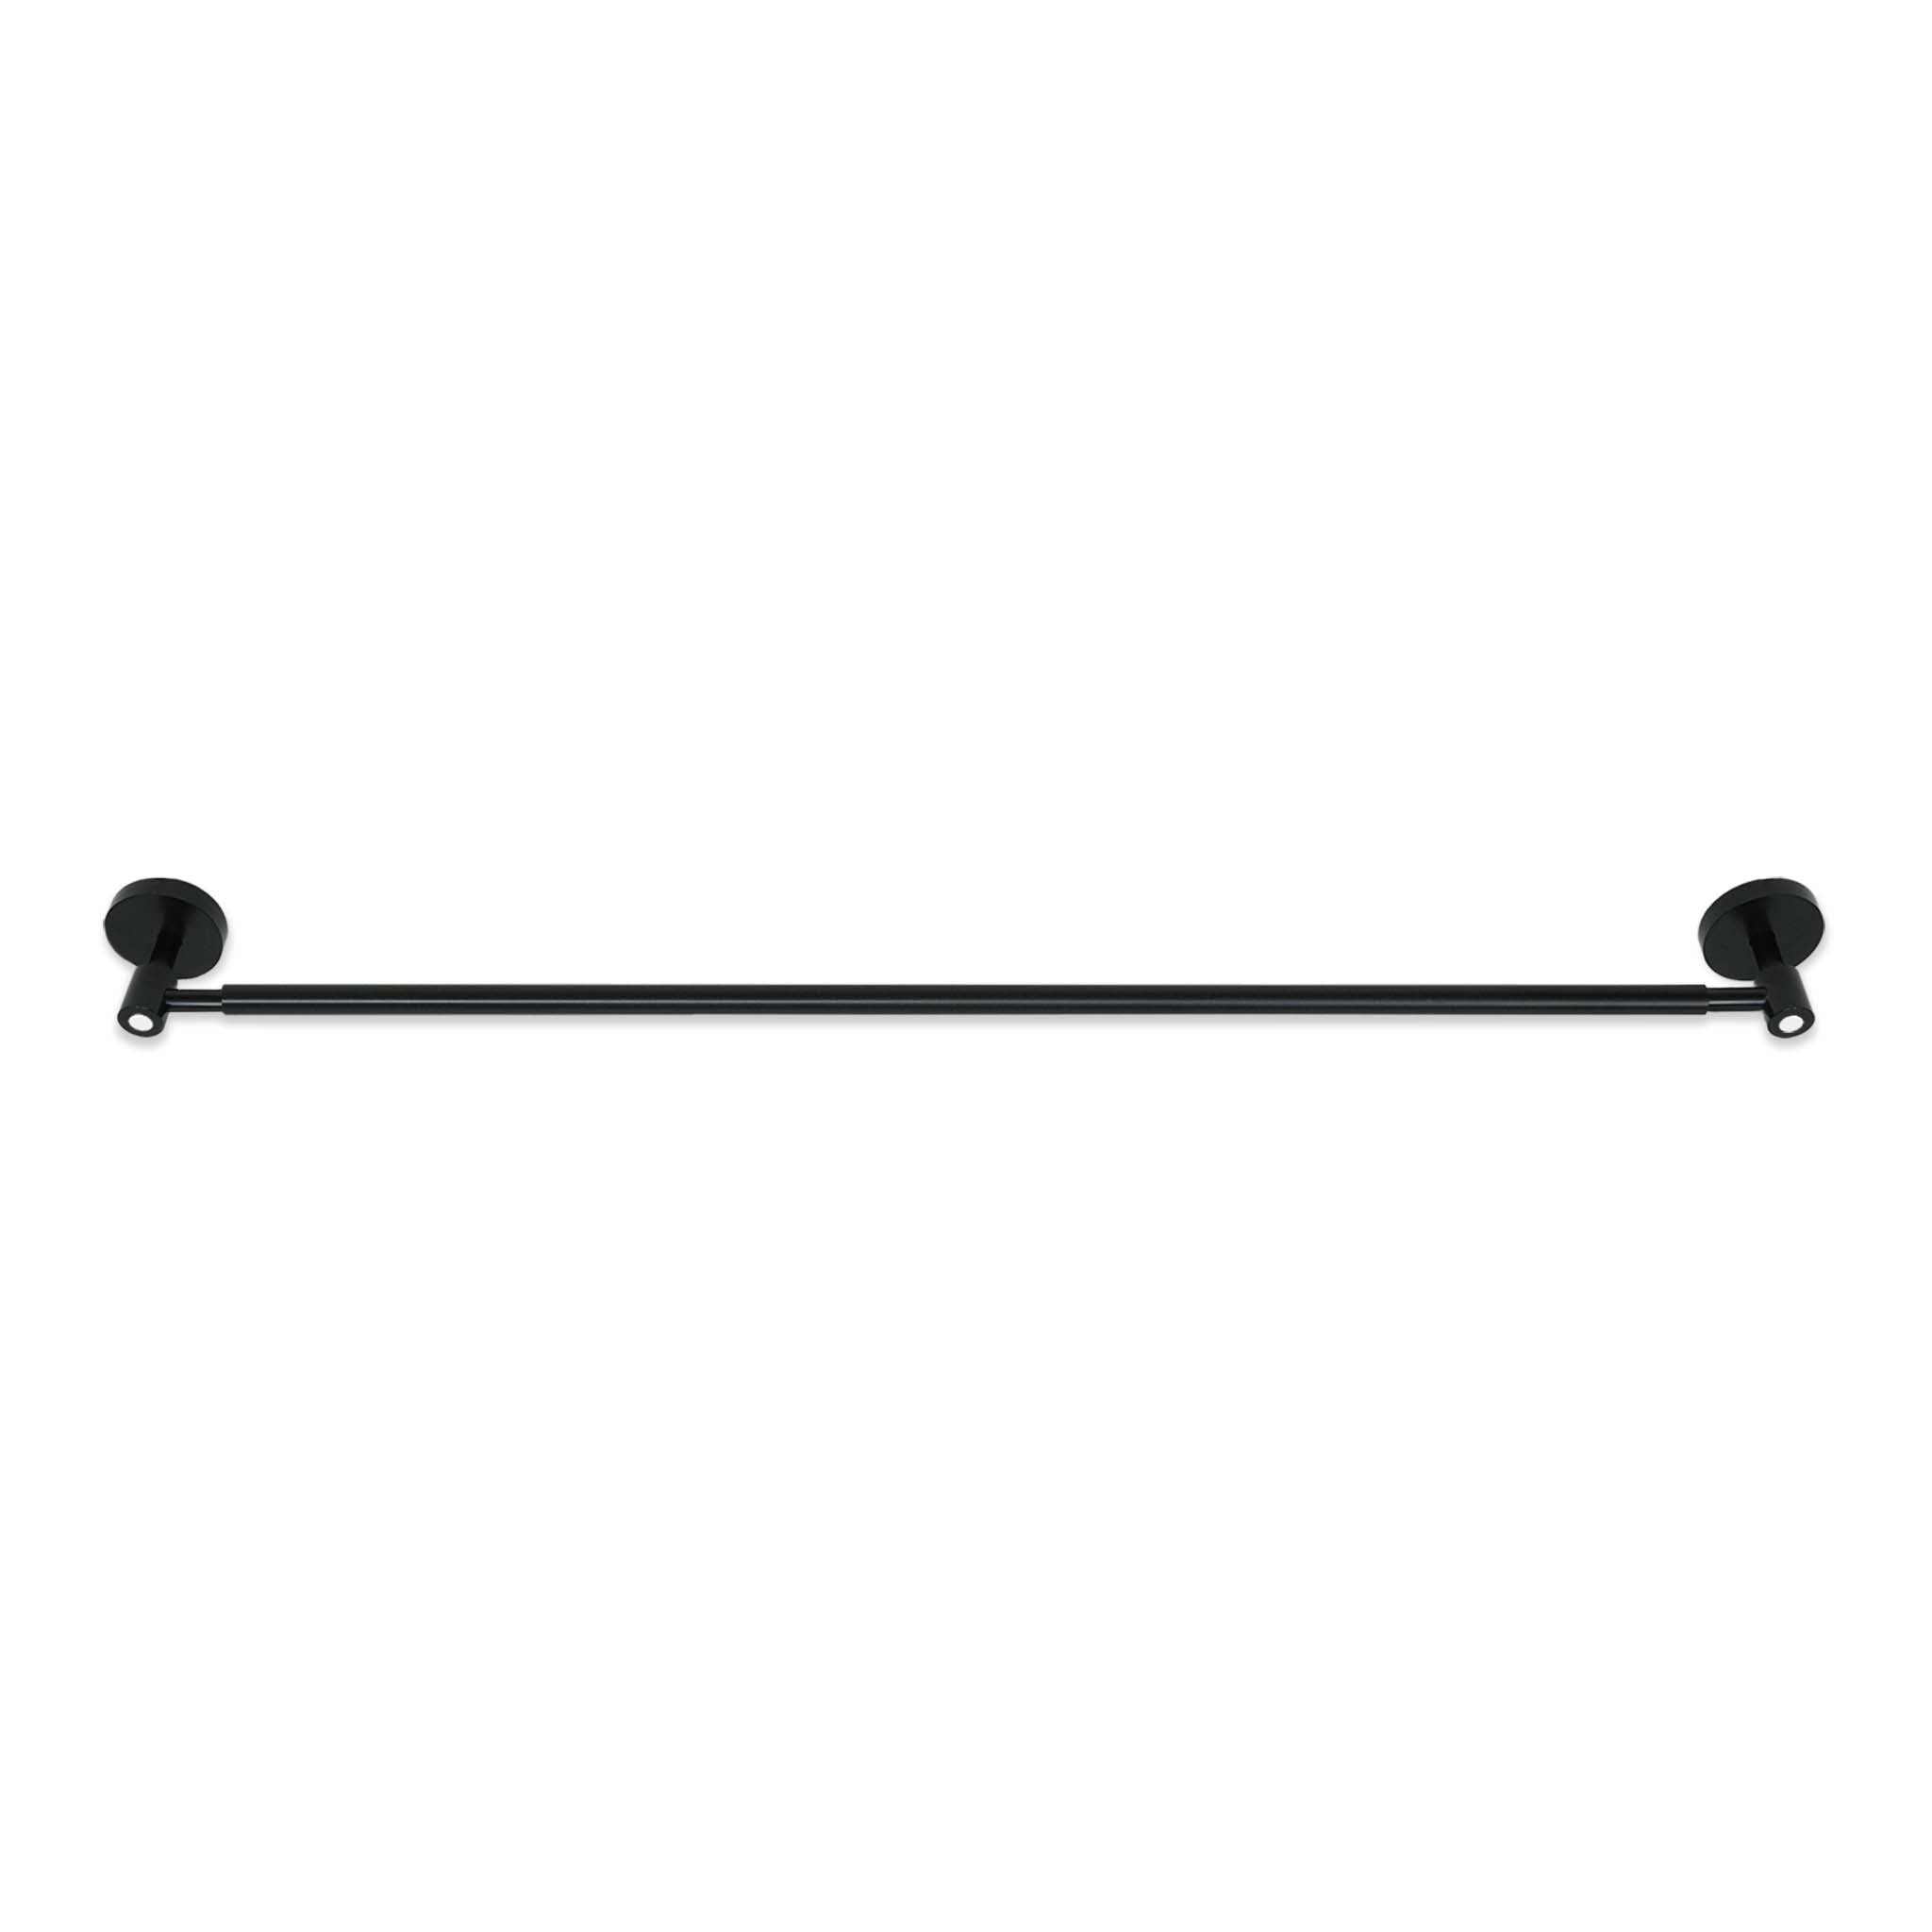 Black and white color Head towel bar 24" Dutton Brown hardware